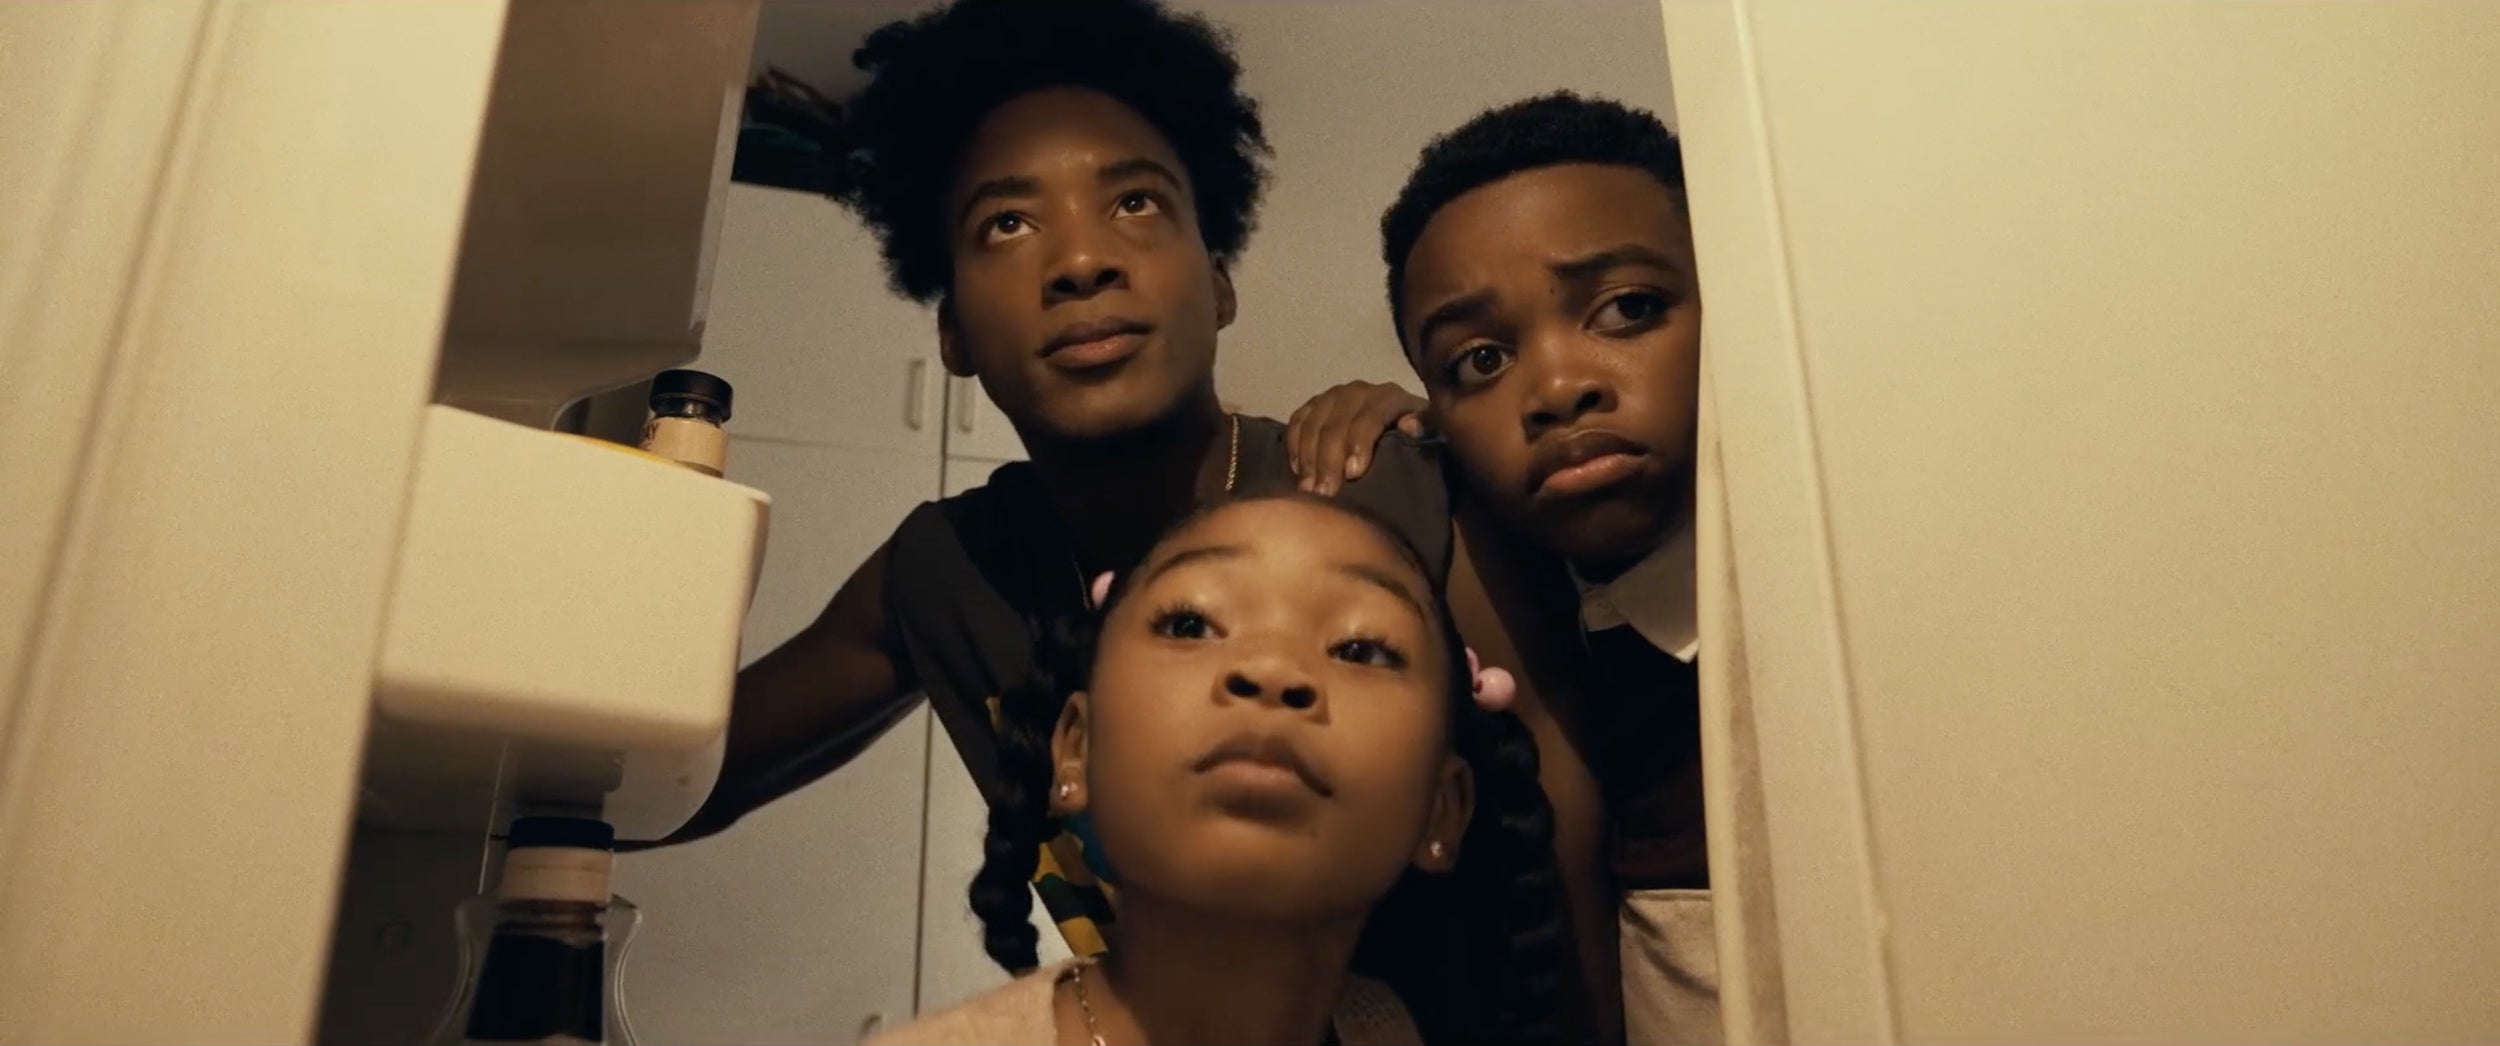 WATCH: Sanaa Lathan, Mike Epps And Algee Smith Star In New Film, ‘YOUNG. WILD. FREE.’